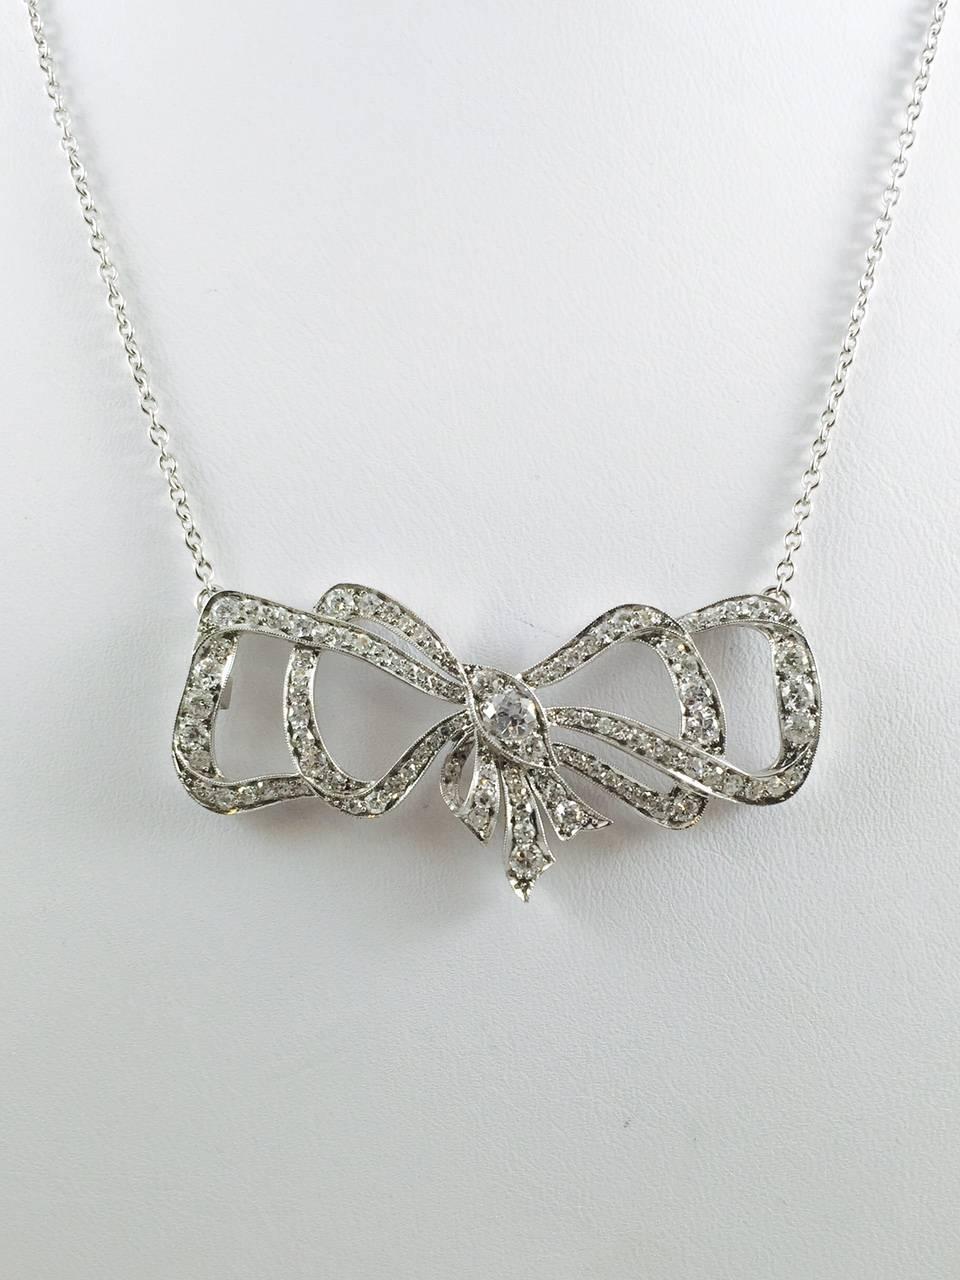 Masterfully created in Platinum.  Curves, twists and turns form the prominent bow centerpiece filled with mine cut diamonds. Every edge of the bow is finished with milgrained edges.  Milgrain literally means 